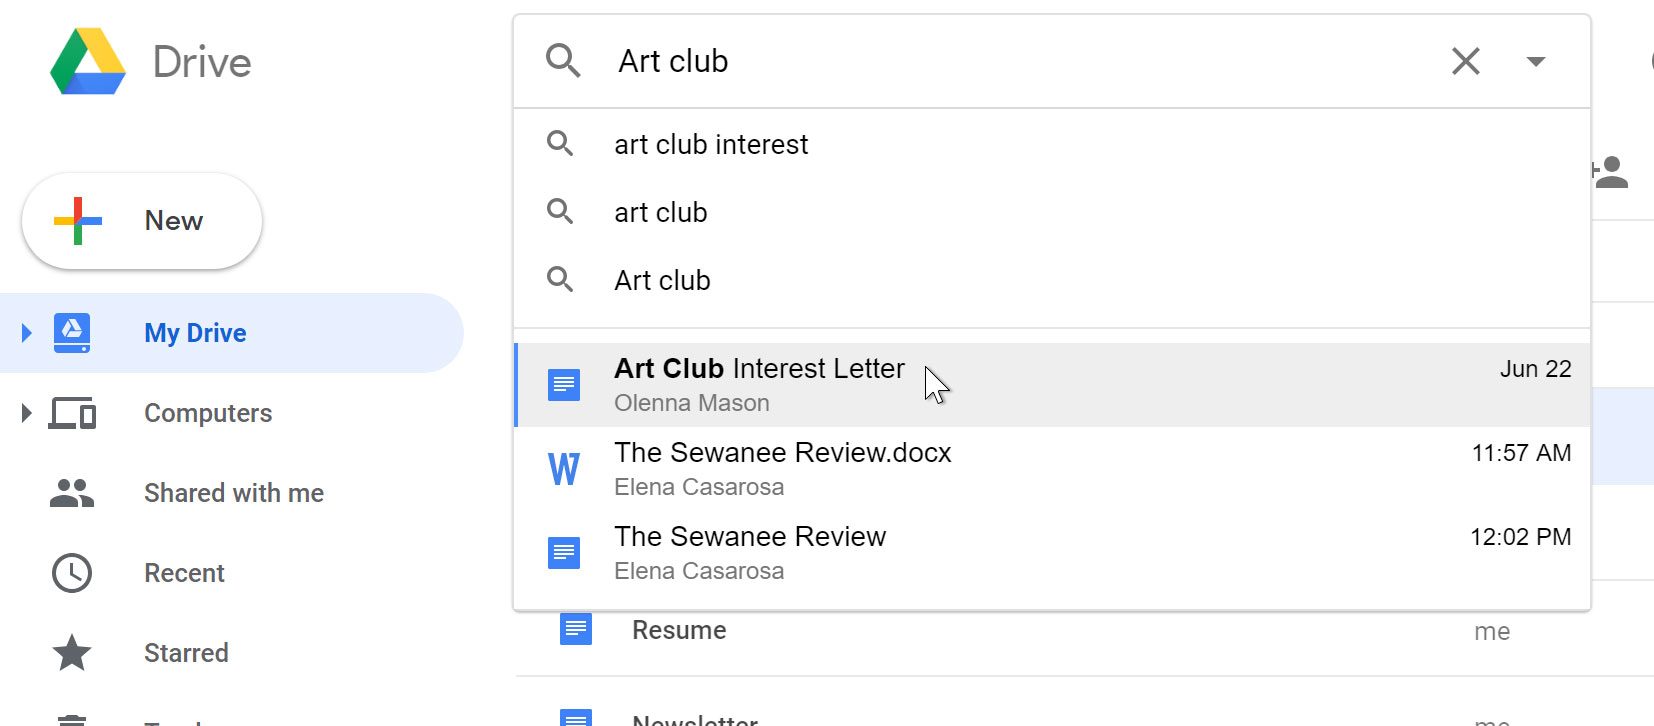 searching for art club files